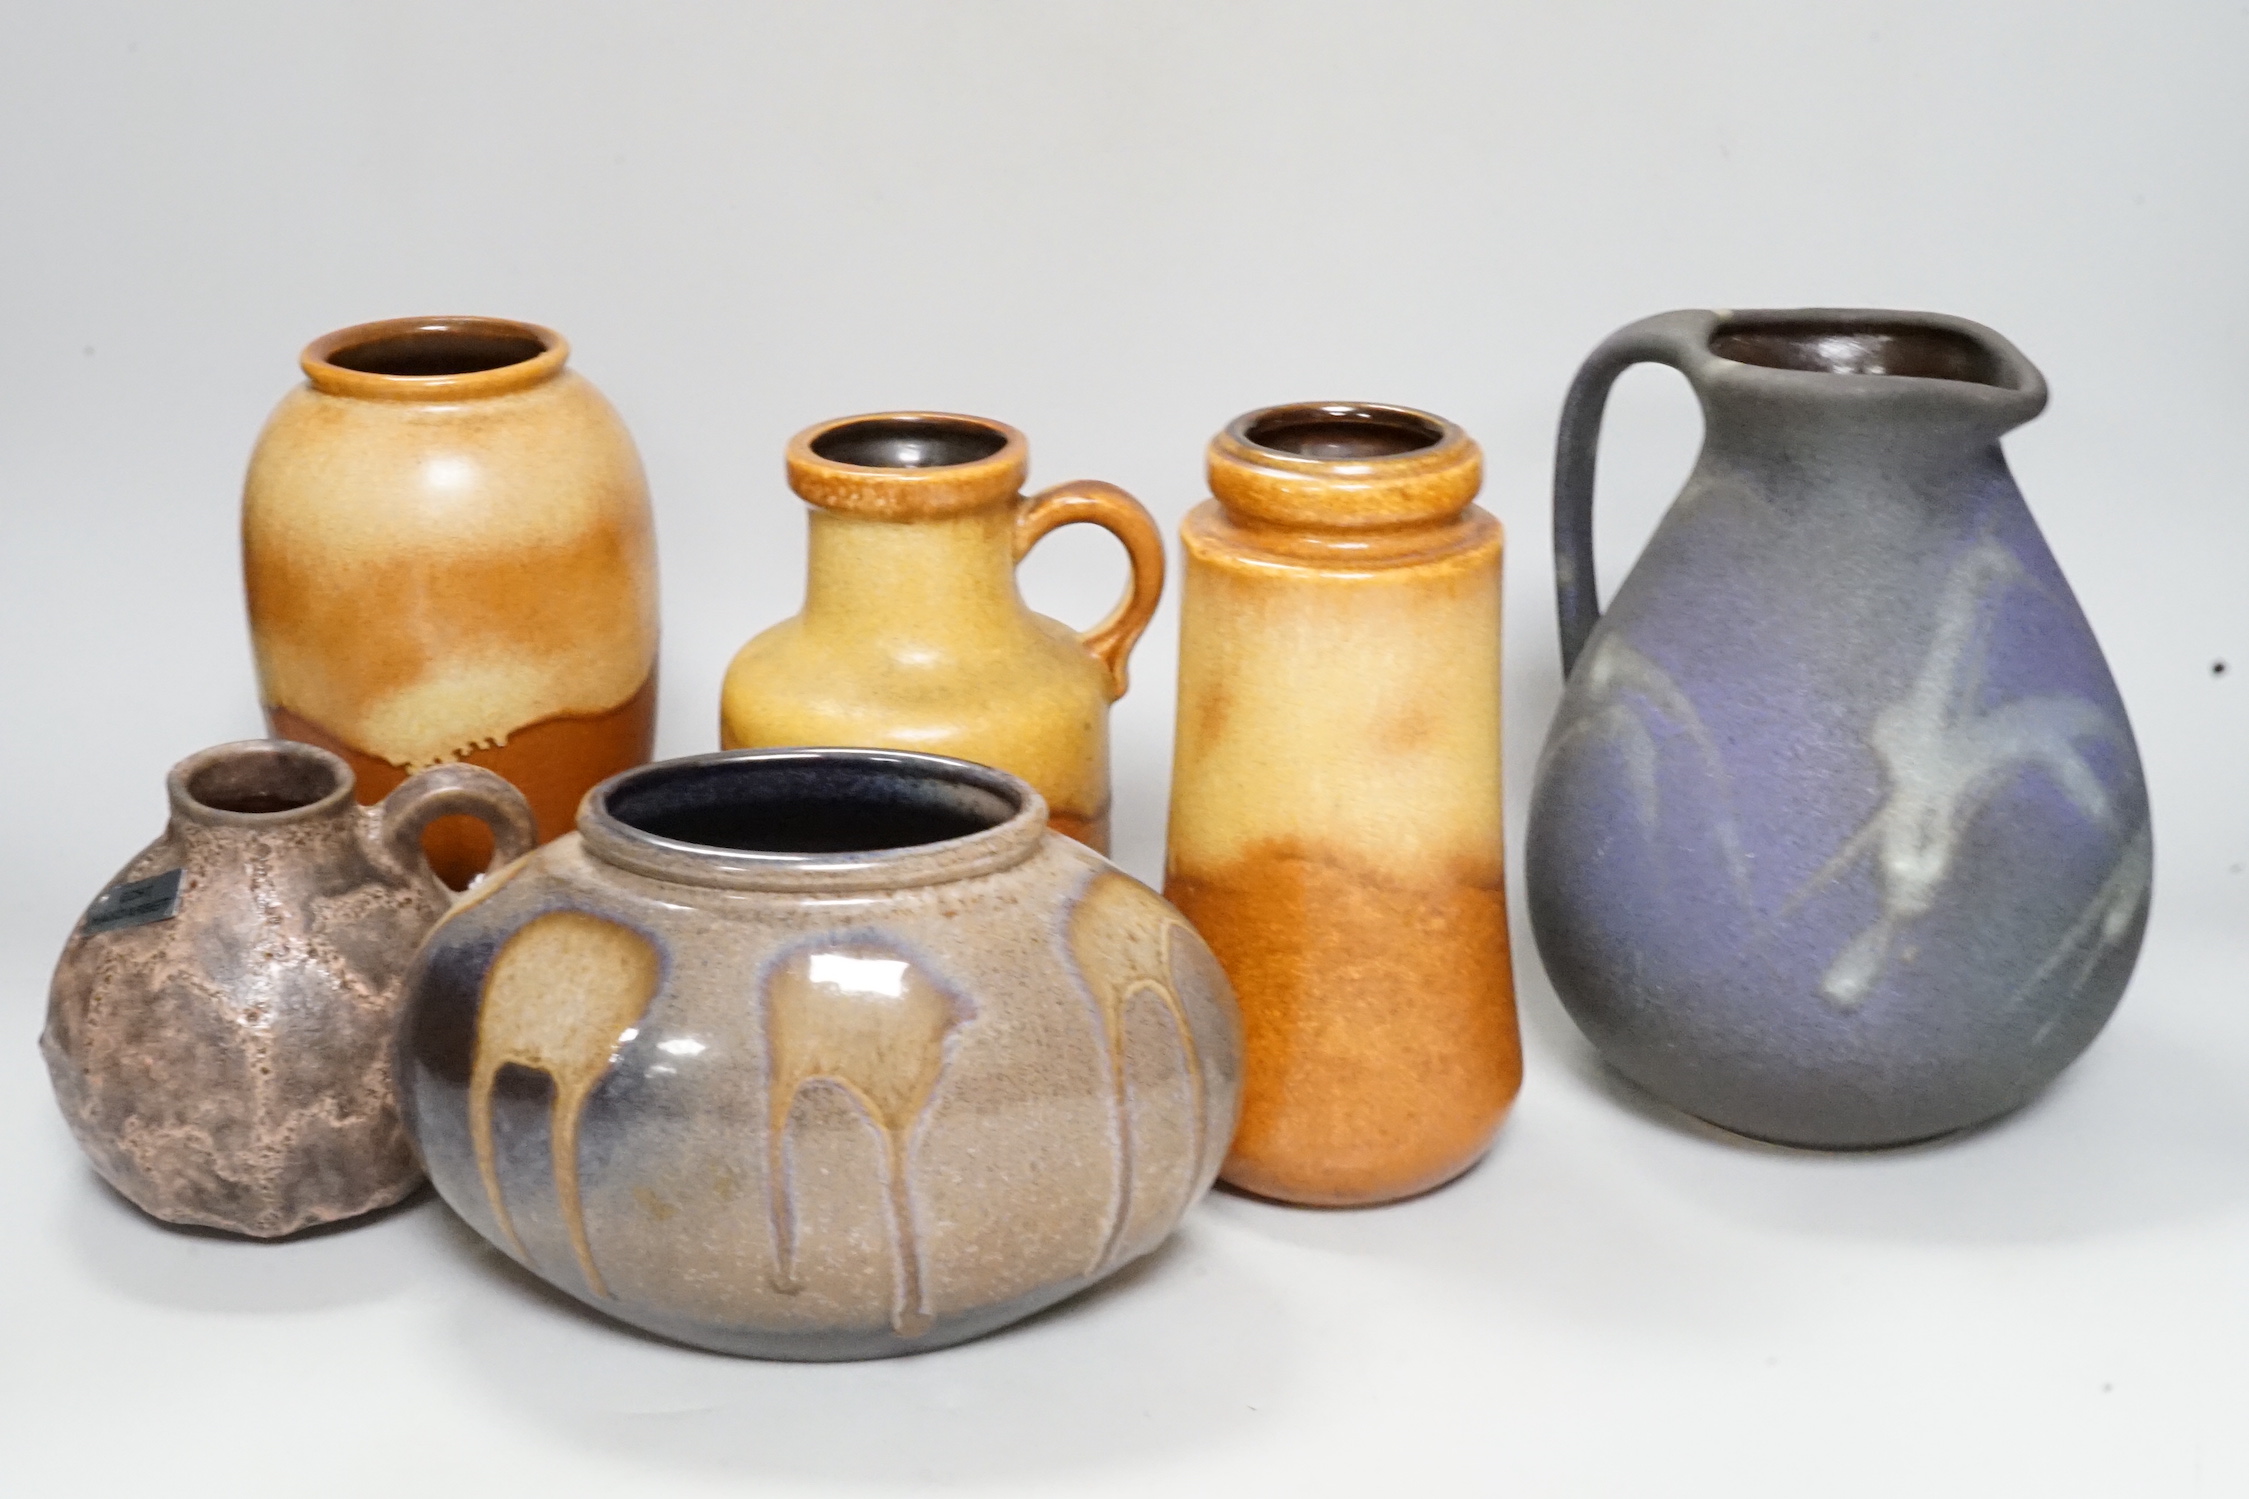 Mid 20th century West German pottery including Scheurich and Ruschau and three mid century West German pots, tallest 19cm